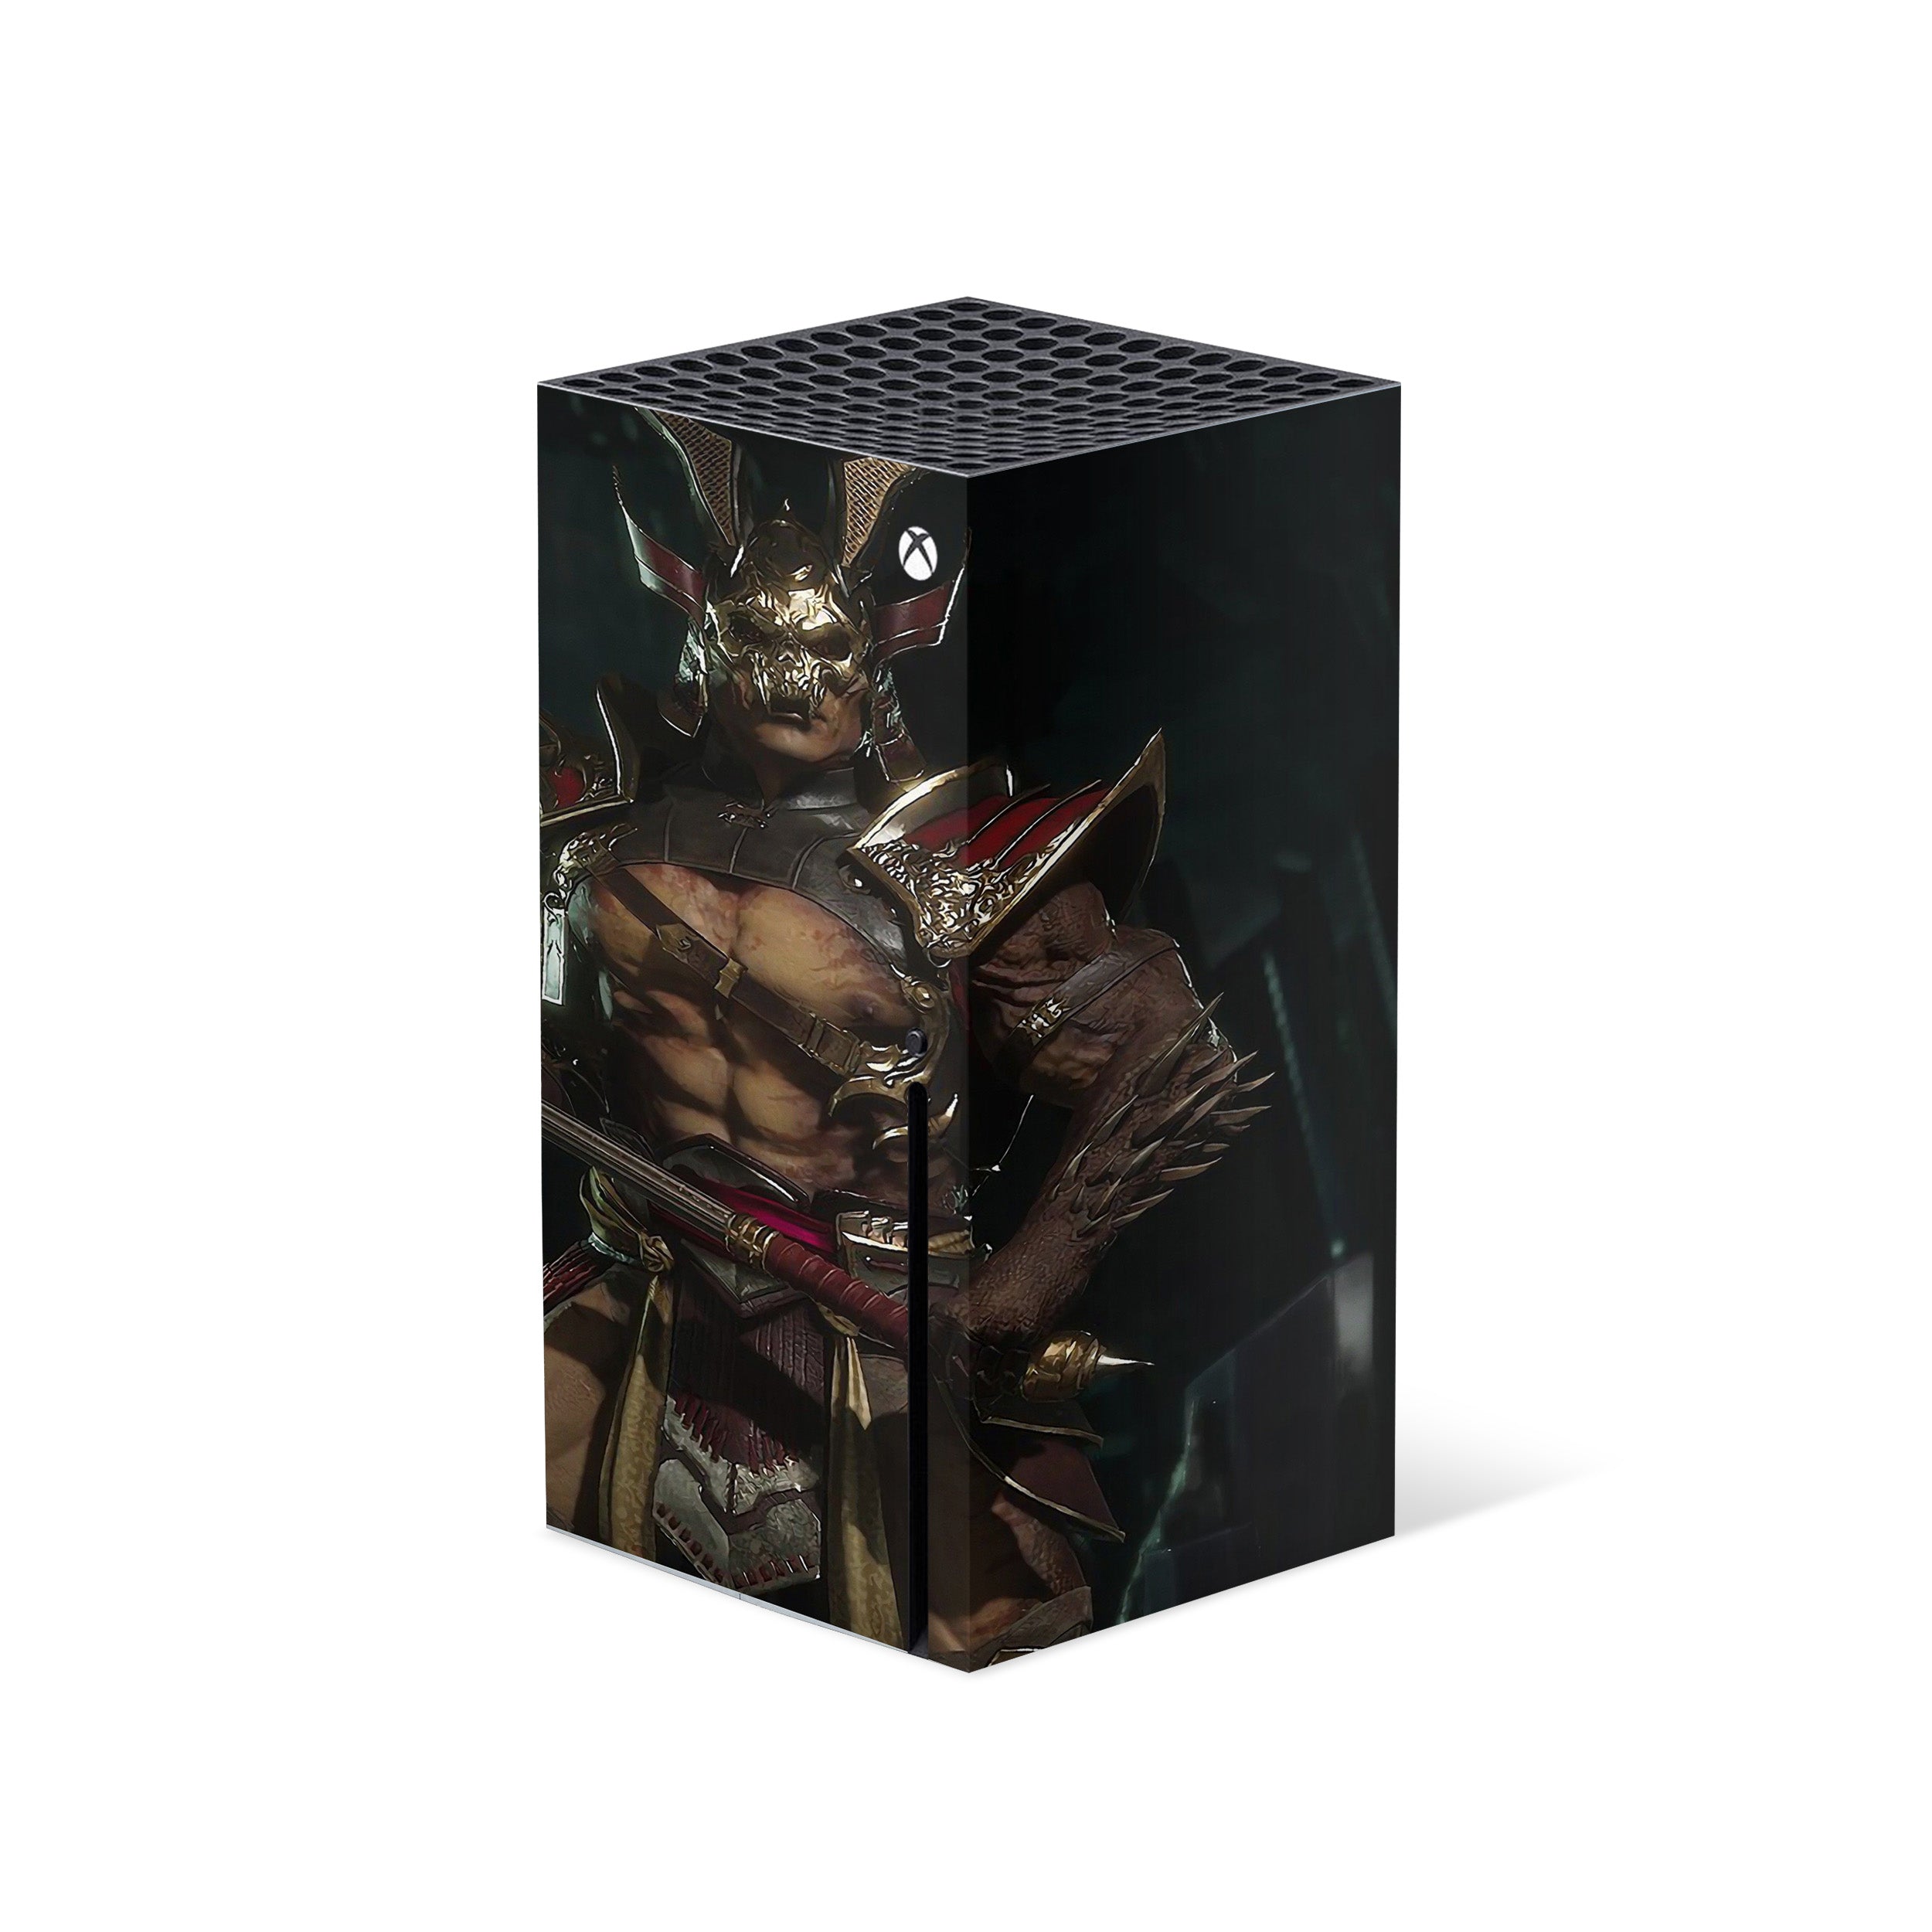 A video game skin featuring a Mortal Kombat 11 Shao Kahn design for the Xbox Series X.